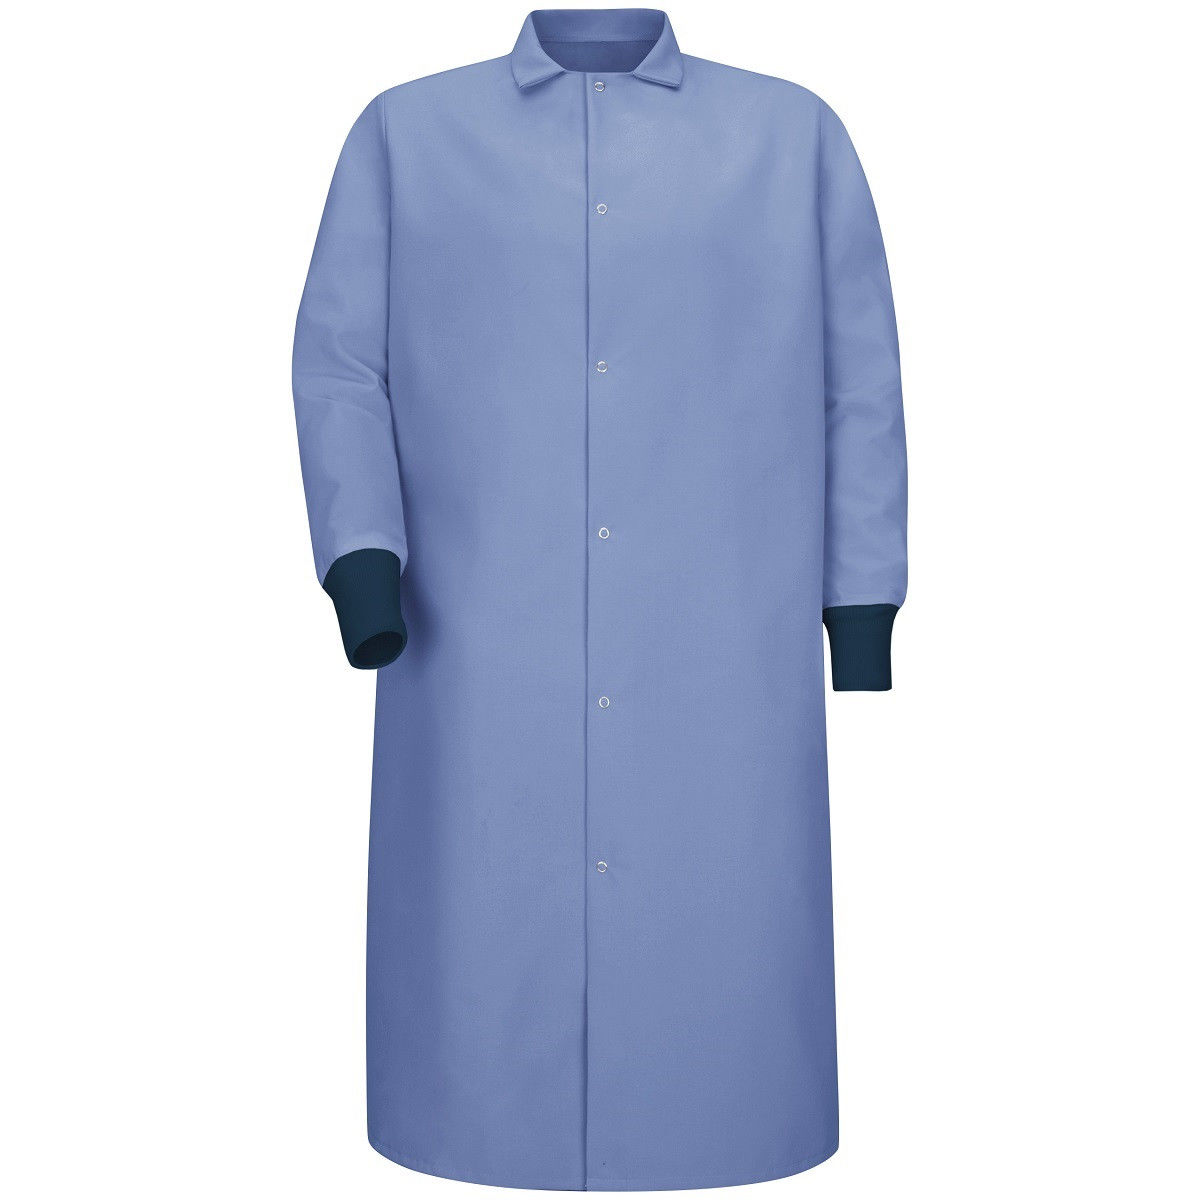 Are you able to bunch the sleeves up to the elbow on this butcher coat?